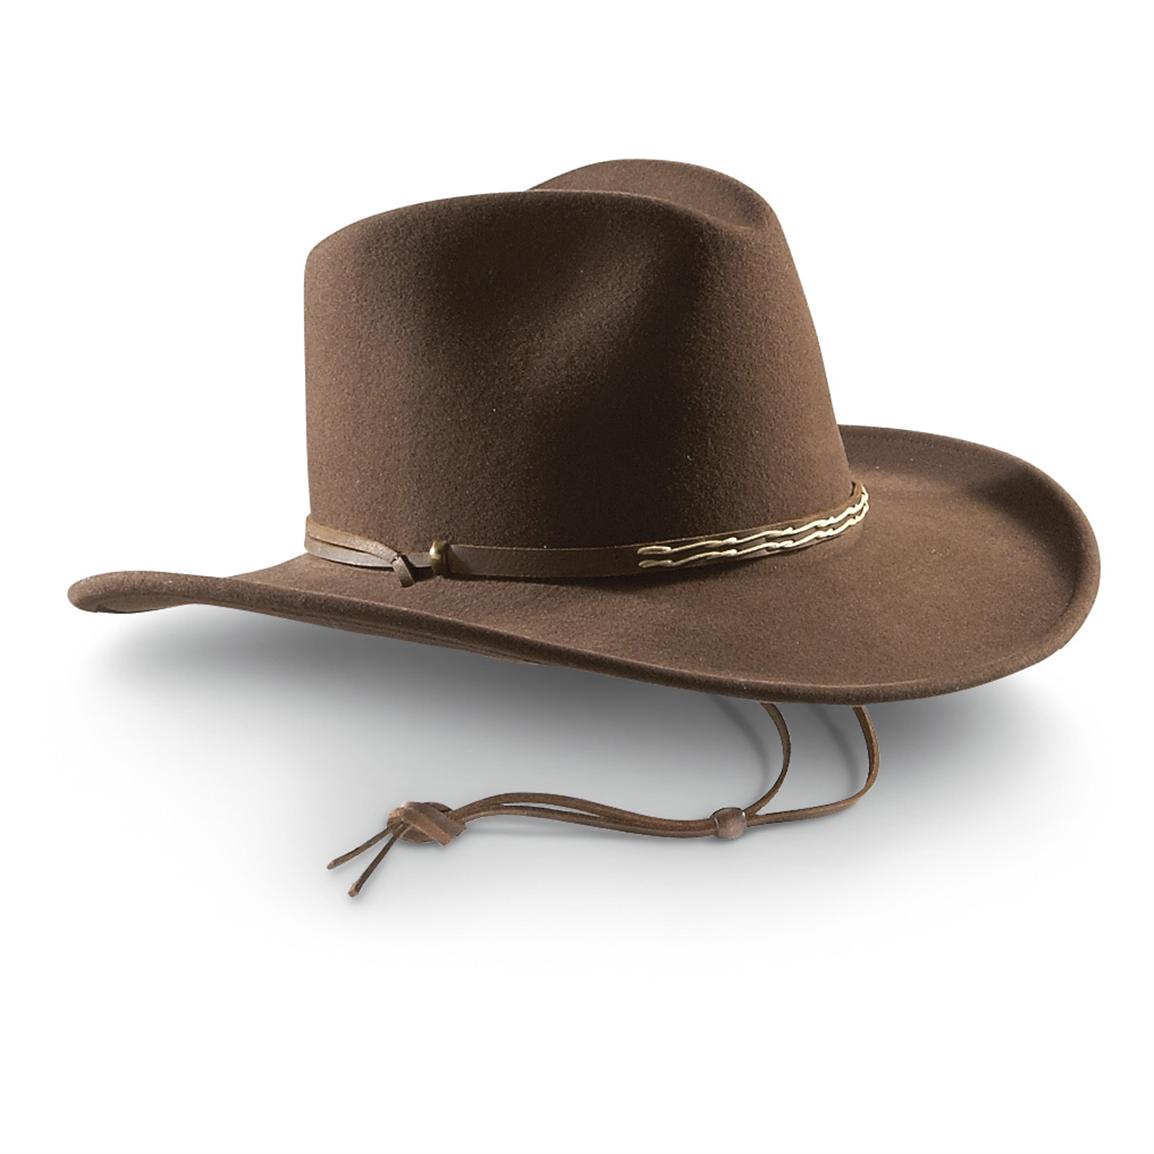 Bailey® Orbell Lite Felt Cowboy Hat, Brown - 421675, Hats & Caps at